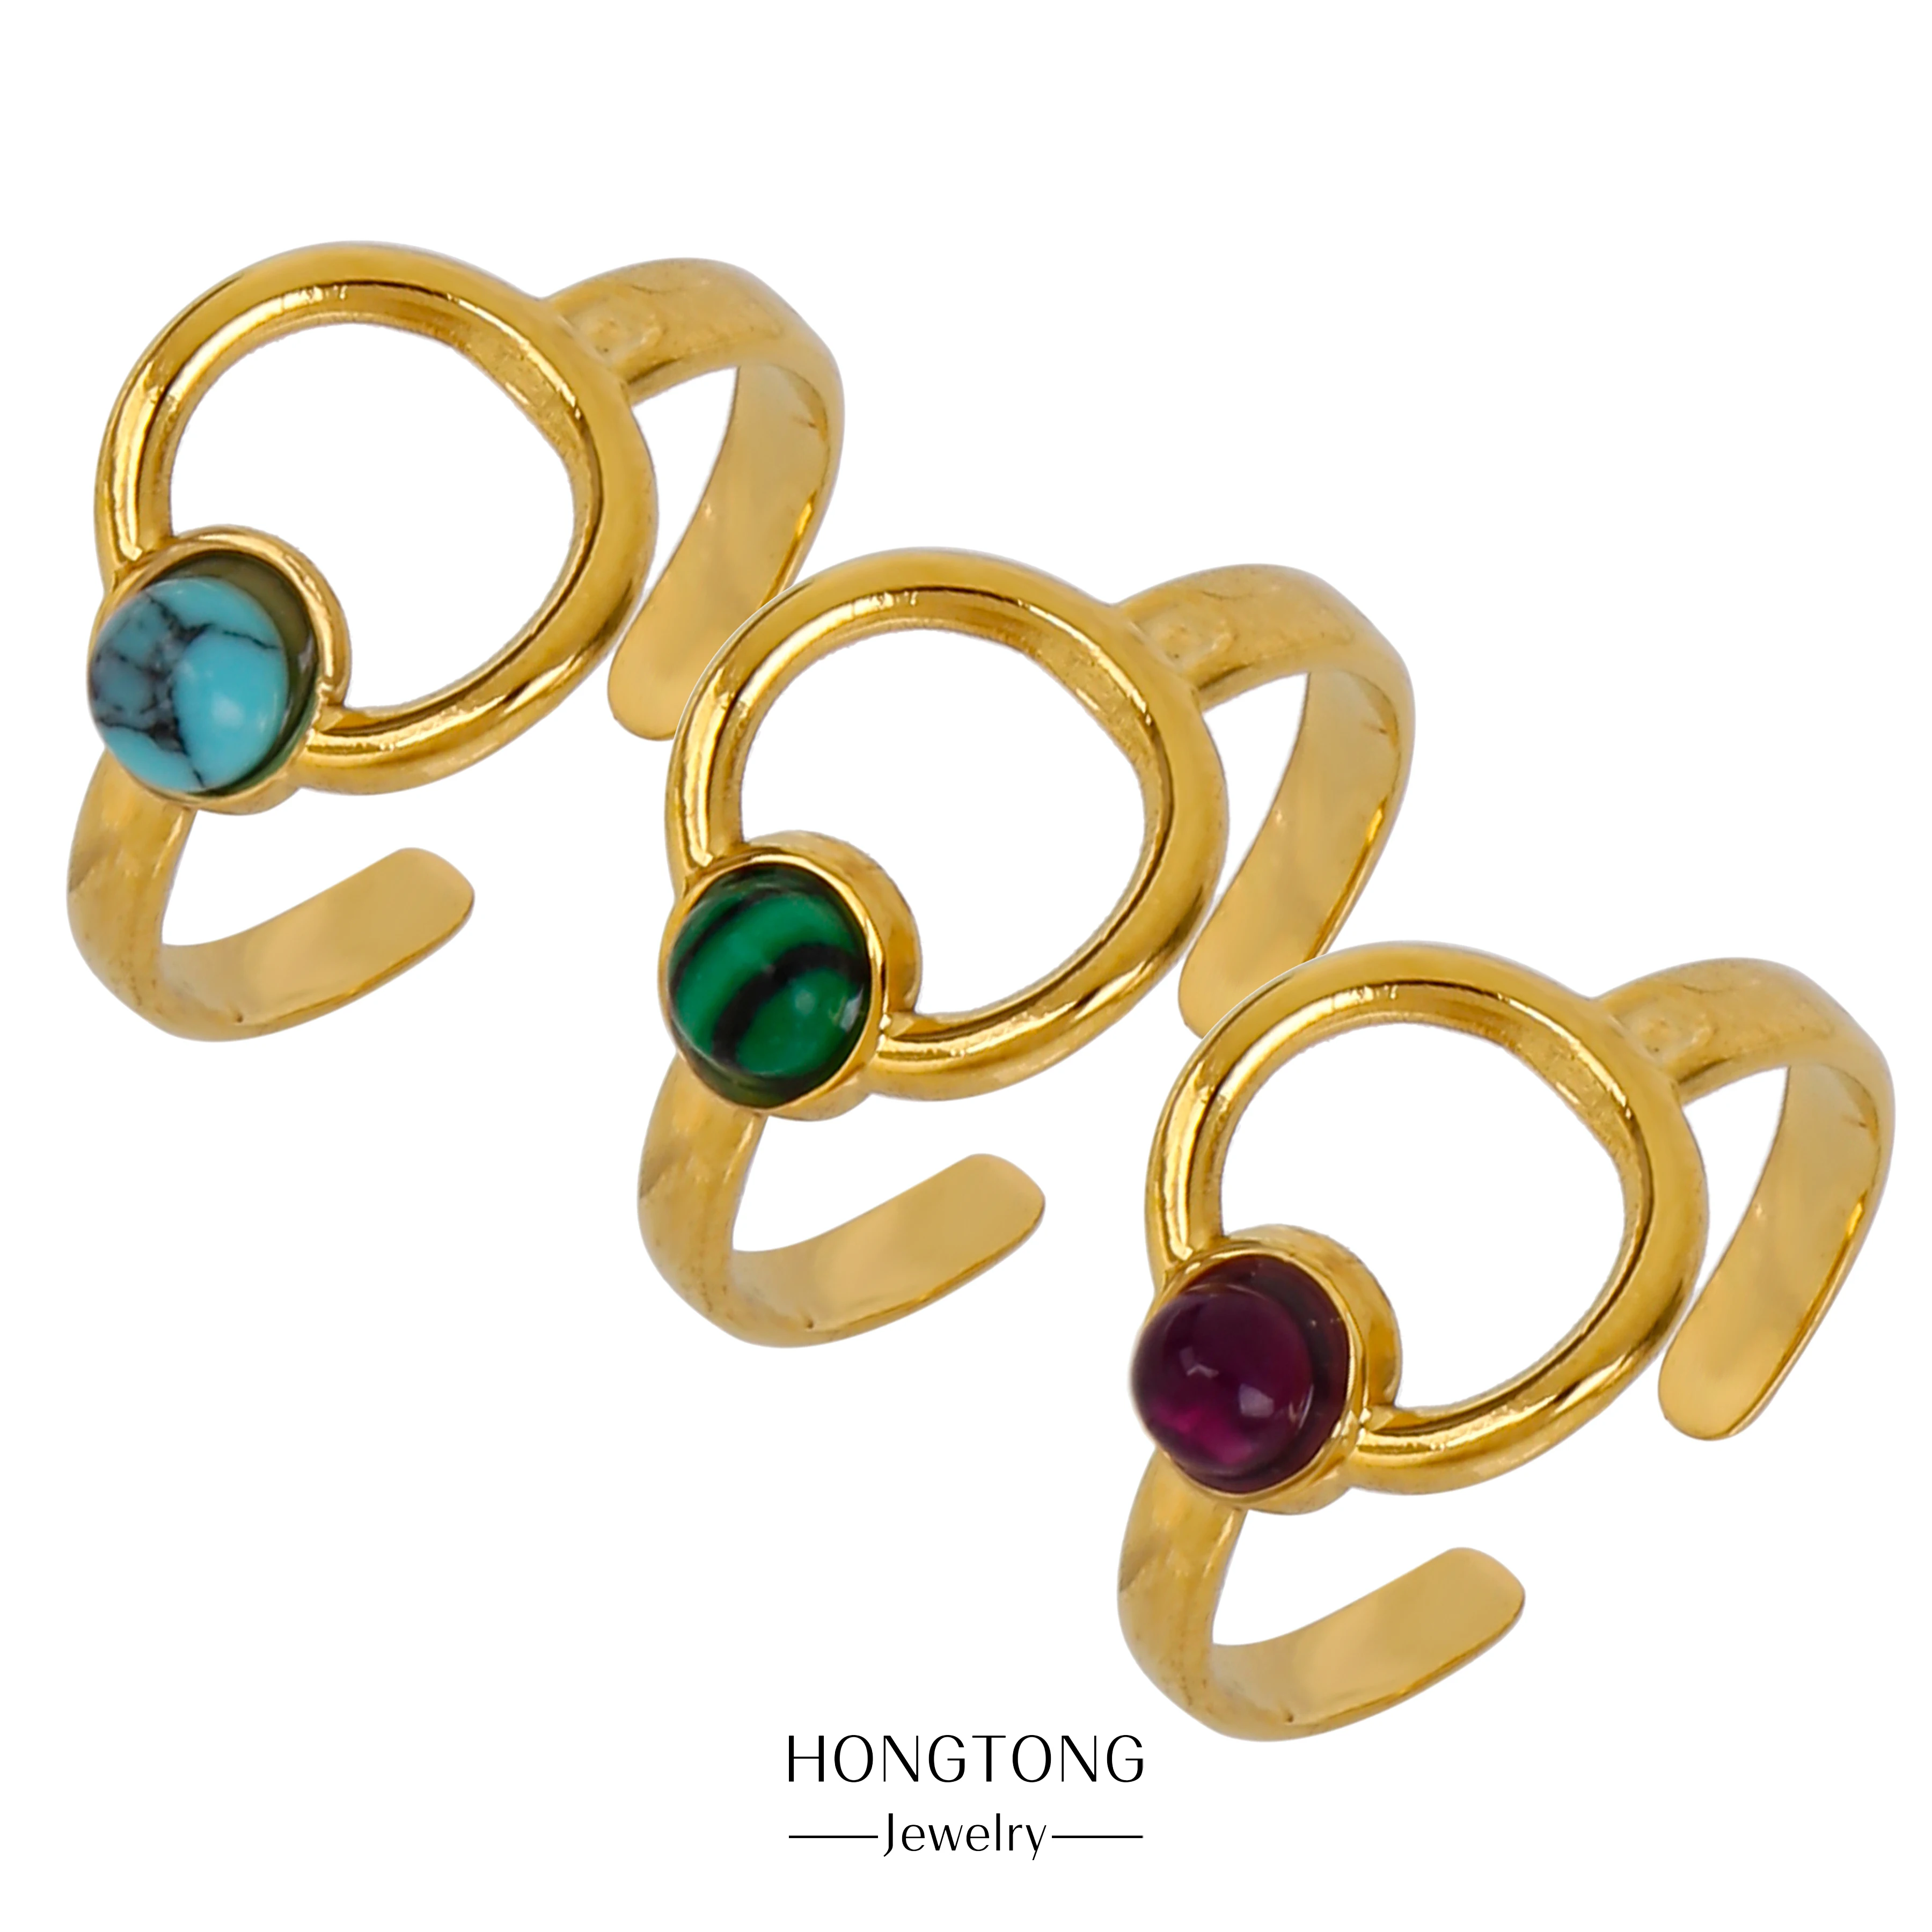 

HONGTONG Gold-Plated Luxury Irregular Gem Fashion Ring Stainless Steel Ring Jewelry Couple Gift Banquet